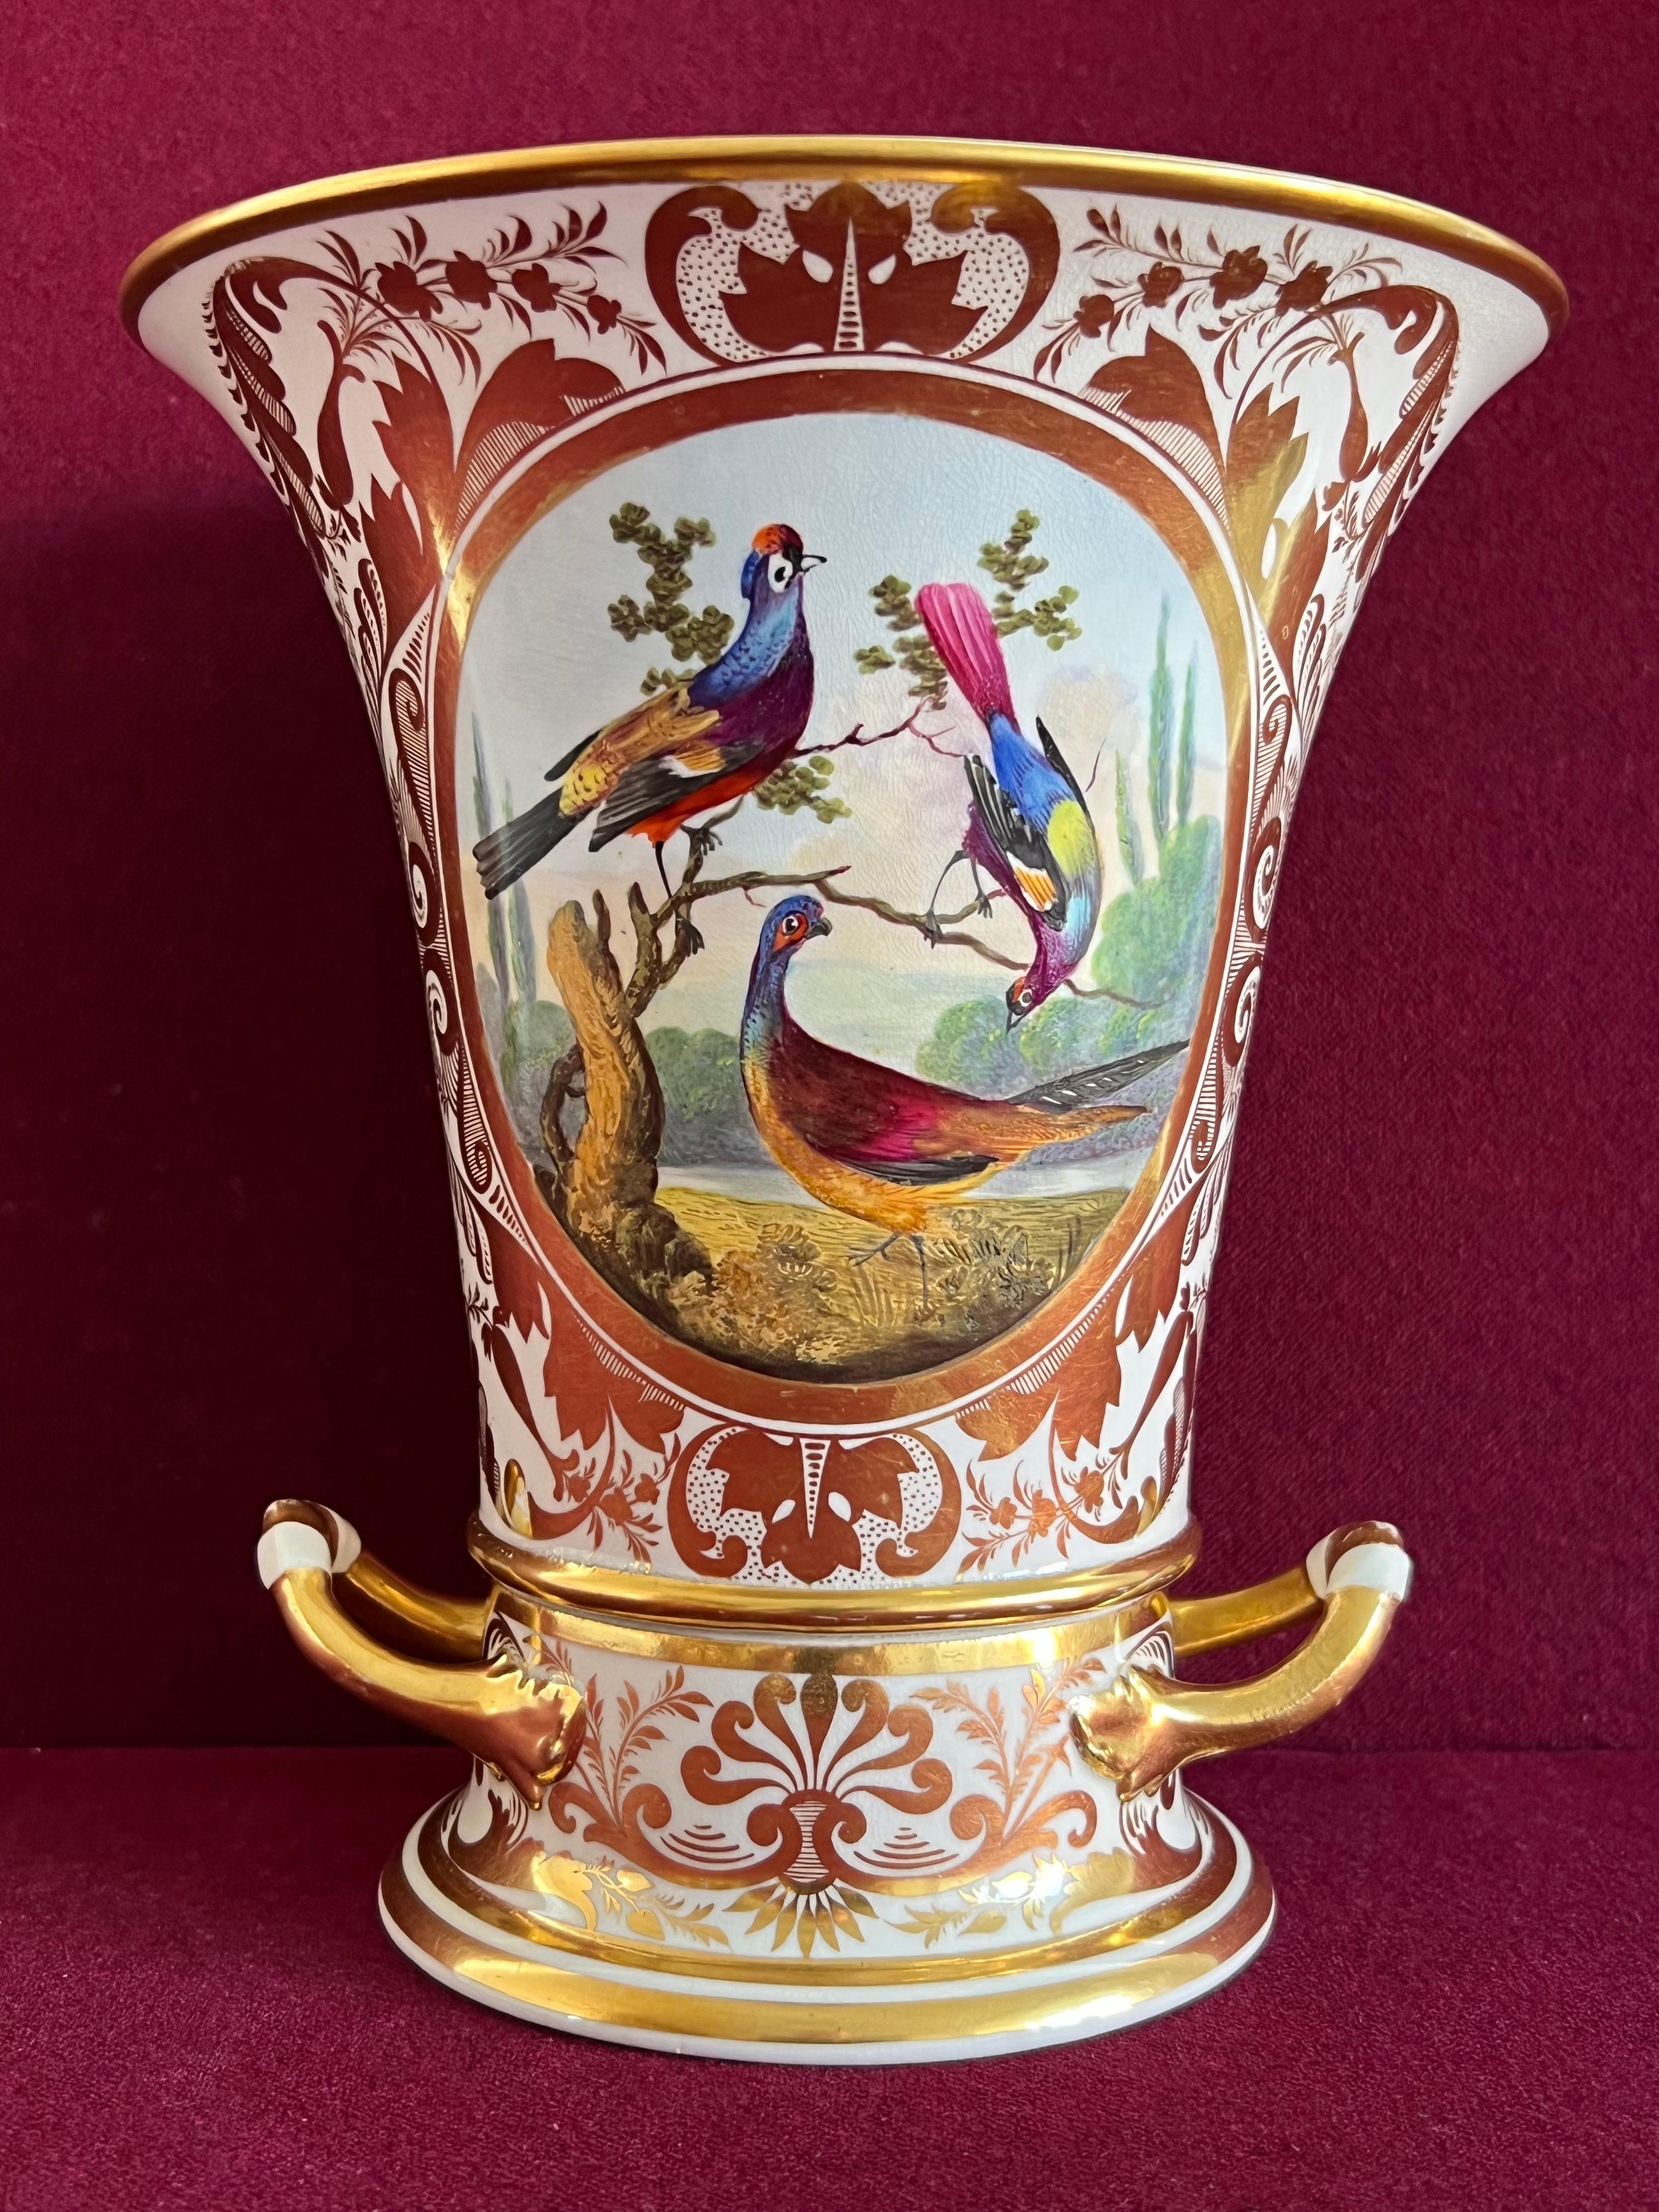 A Derby porcelain two-part vase c.1820. Of elongated campana shape, finely decorated with birds in a landscape by Richard Dodson within an ornately gilded cartouche. Crimson crown over crossed swords and the letter D mark to the base. 

Condition: